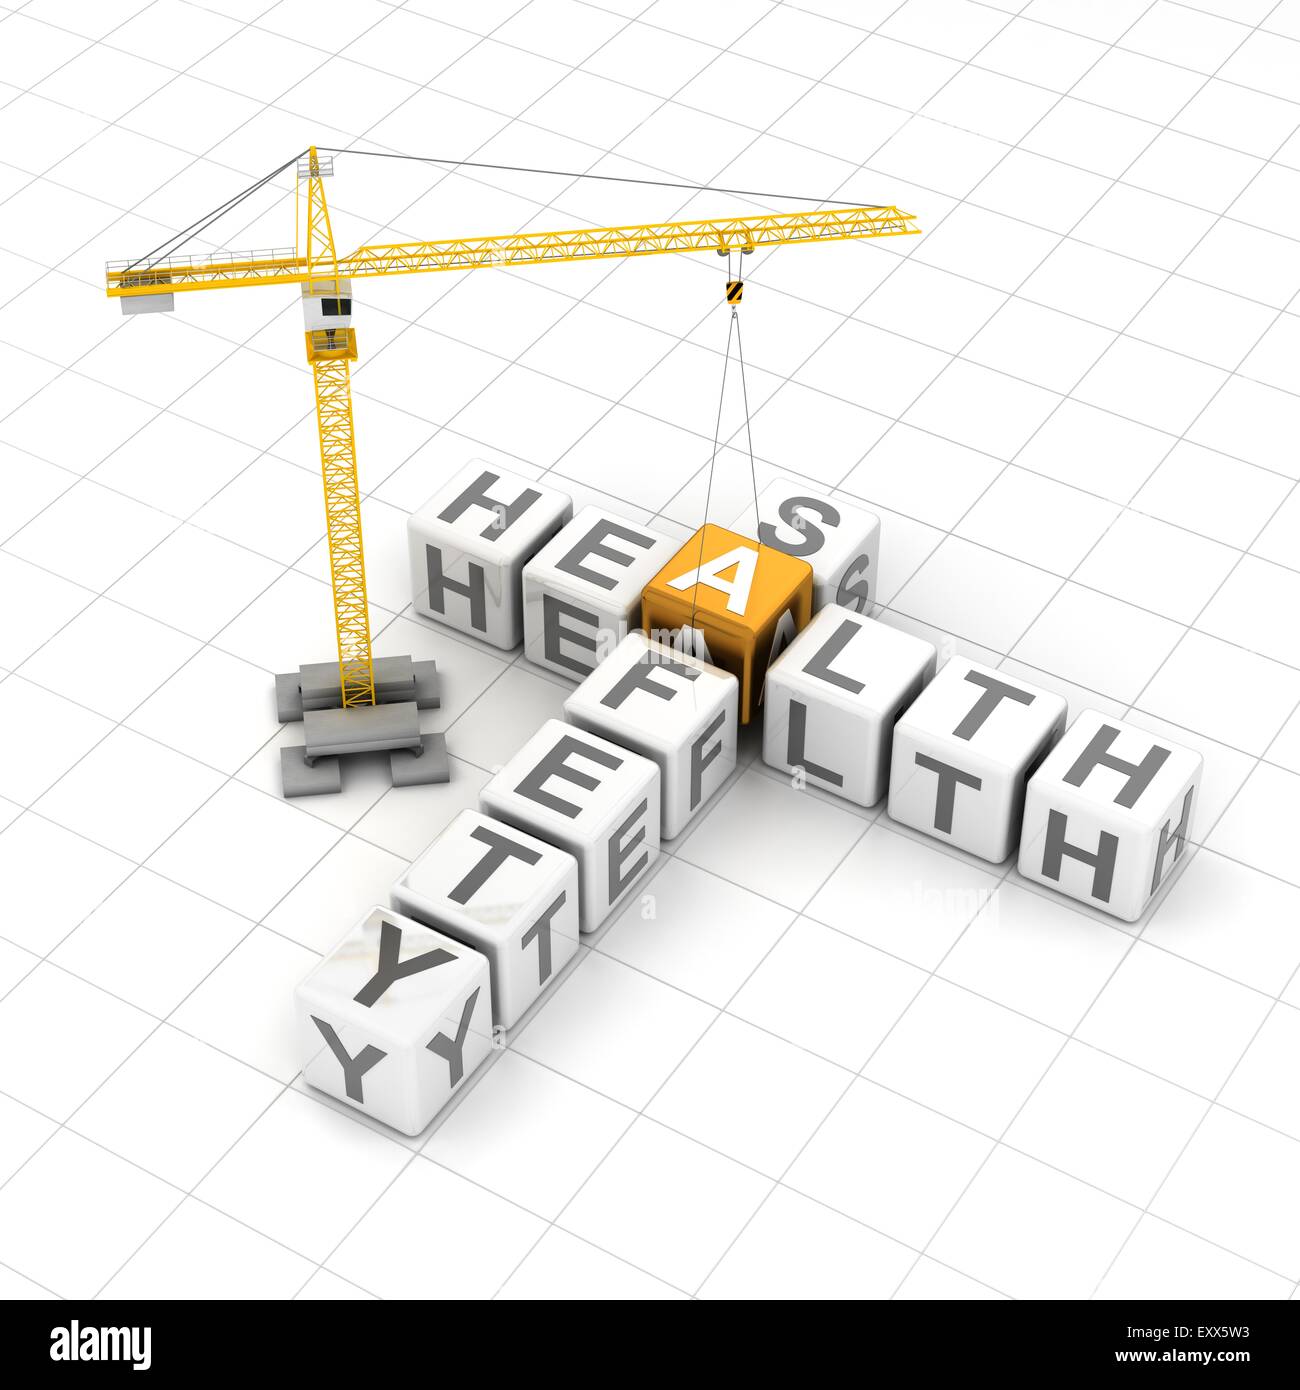 Health and safety concept Stock Photo